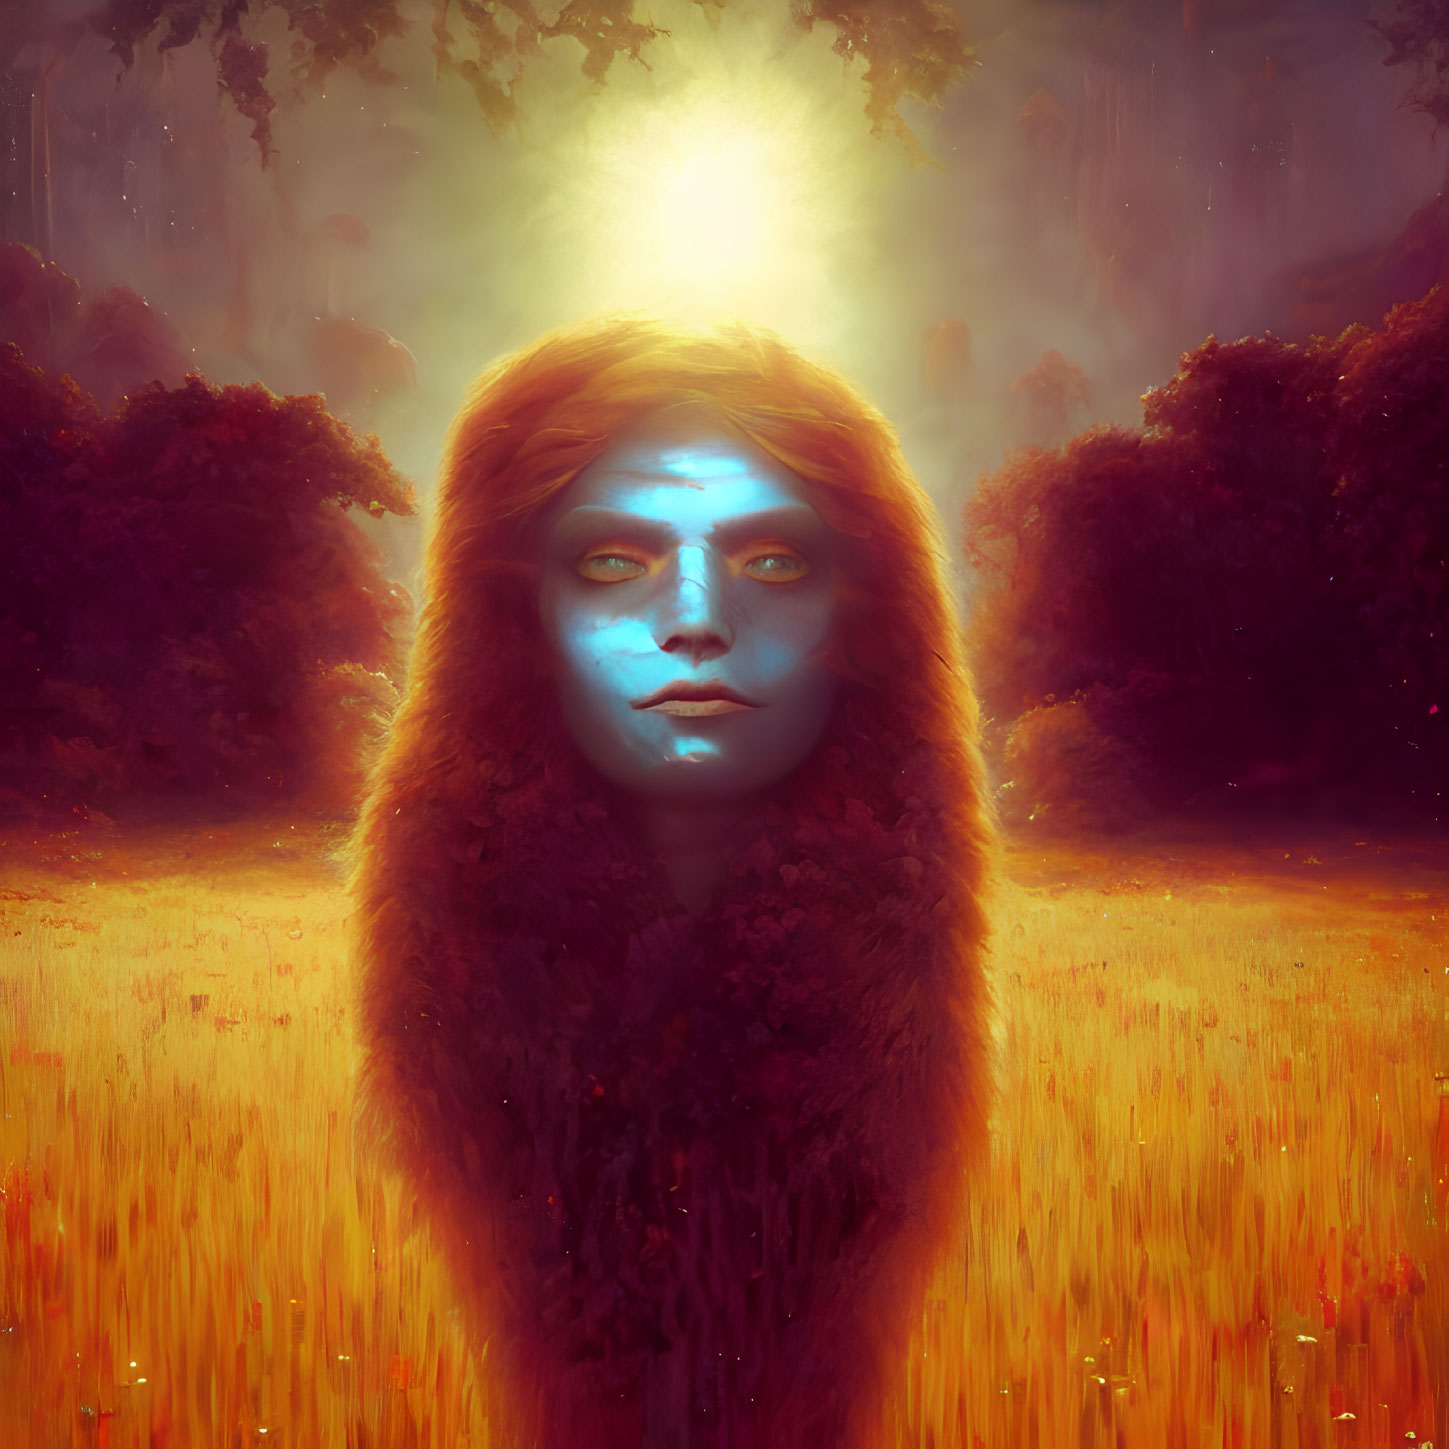 Mystical female figure with blue facial markings in sunlit meadow